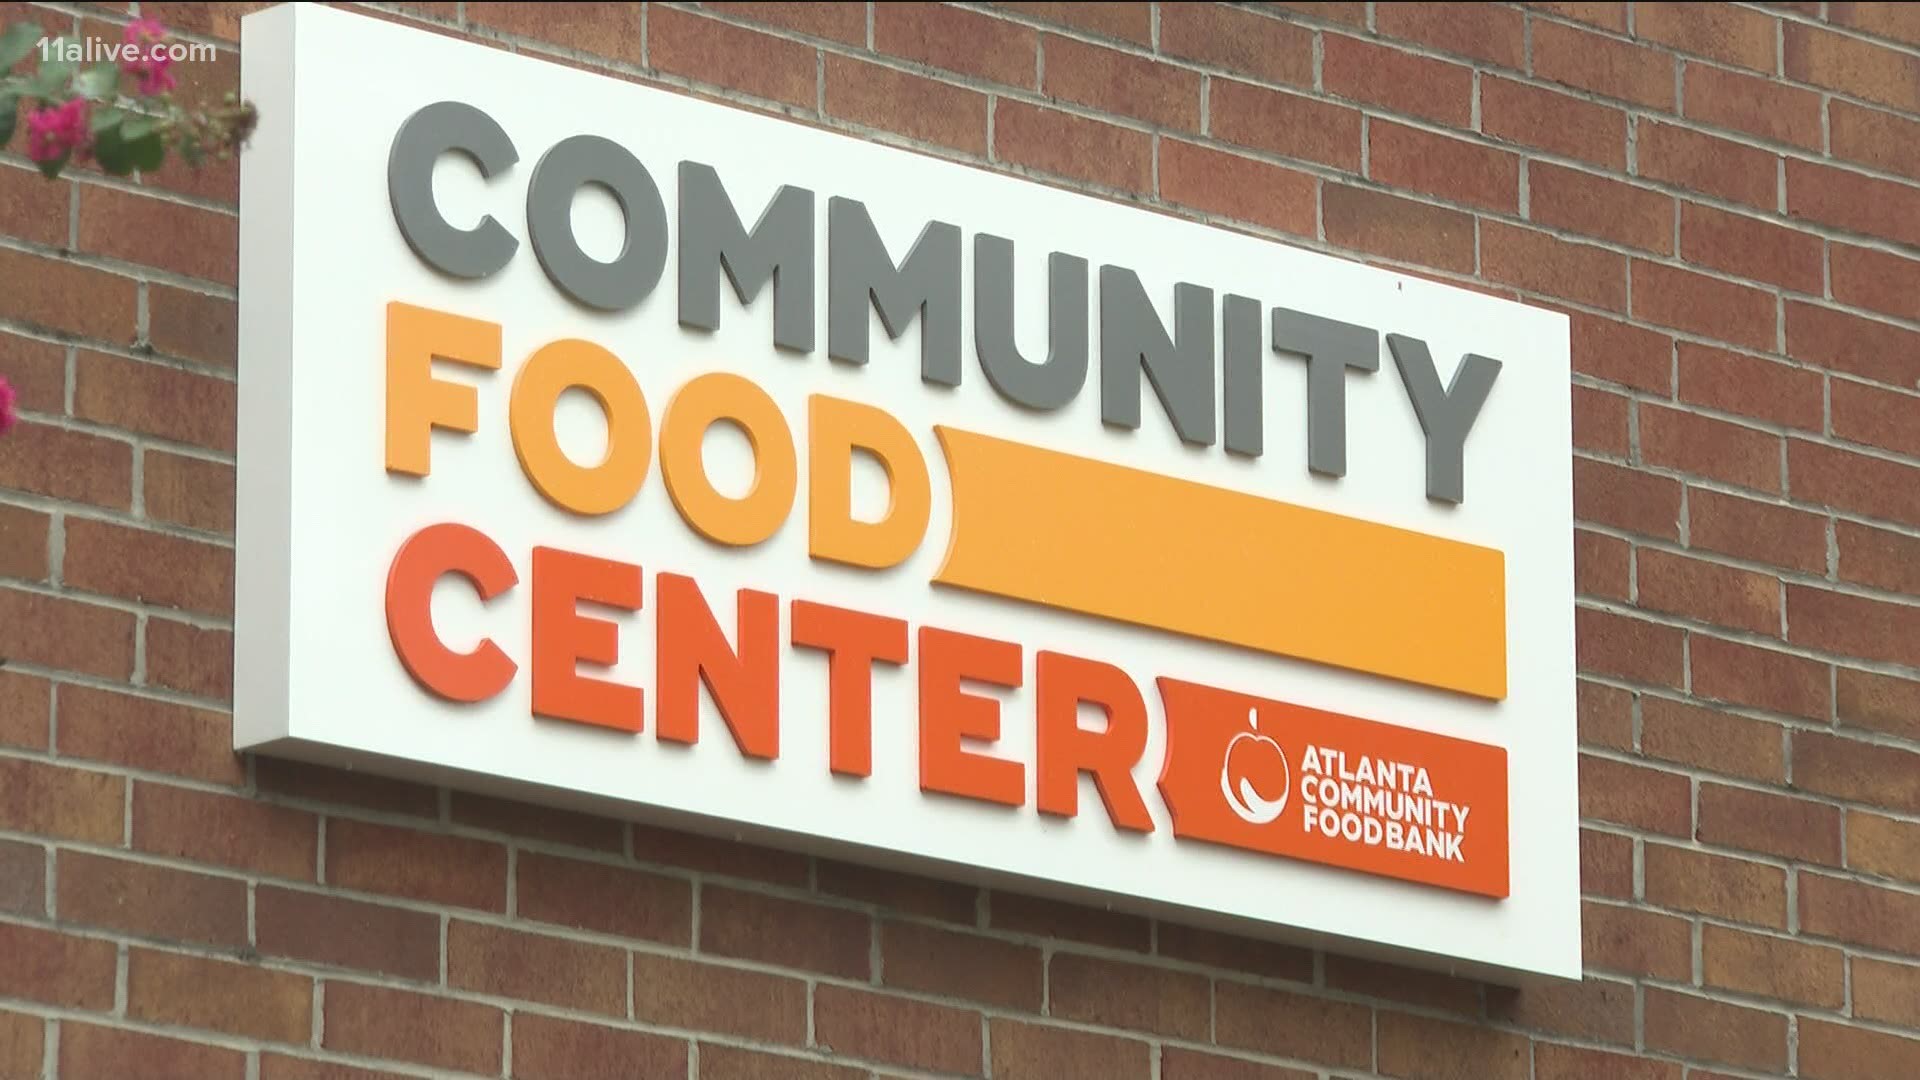 The Atlanta Community Food Bank said over the last year, it's seen a 40 percent increase in the number of people in need. To donate visit http://acfb.org/.